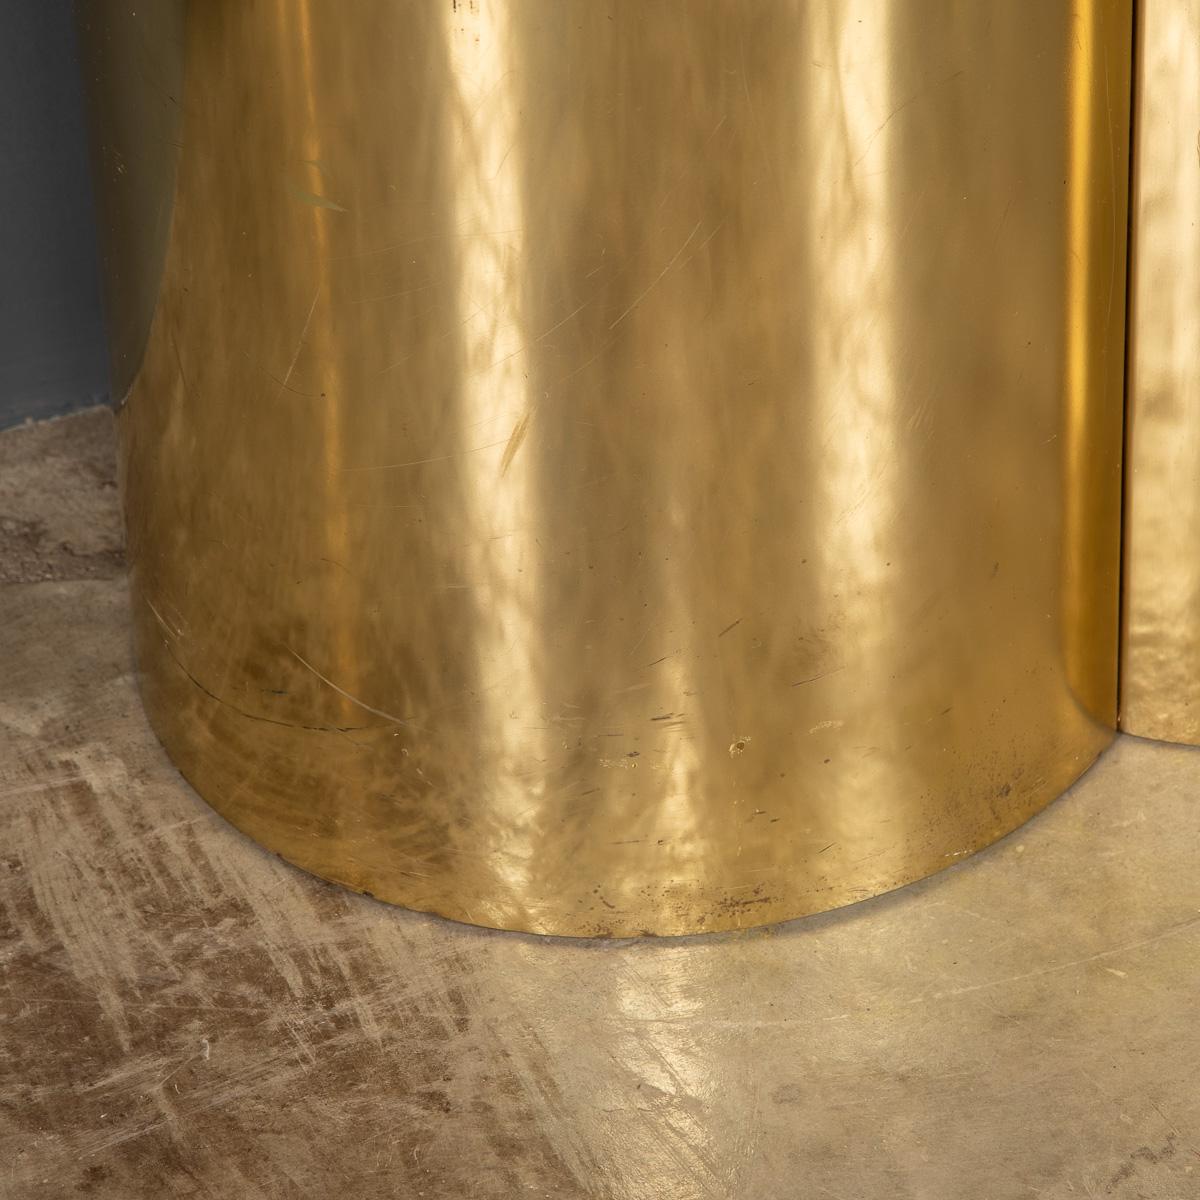 Curved brass covered base with toughened glass top can be used as side tables or console table.

Condition
In Great Condition - No Damage.

Size
Width: 120cm
Depth: 44cm
Height: 73cm.